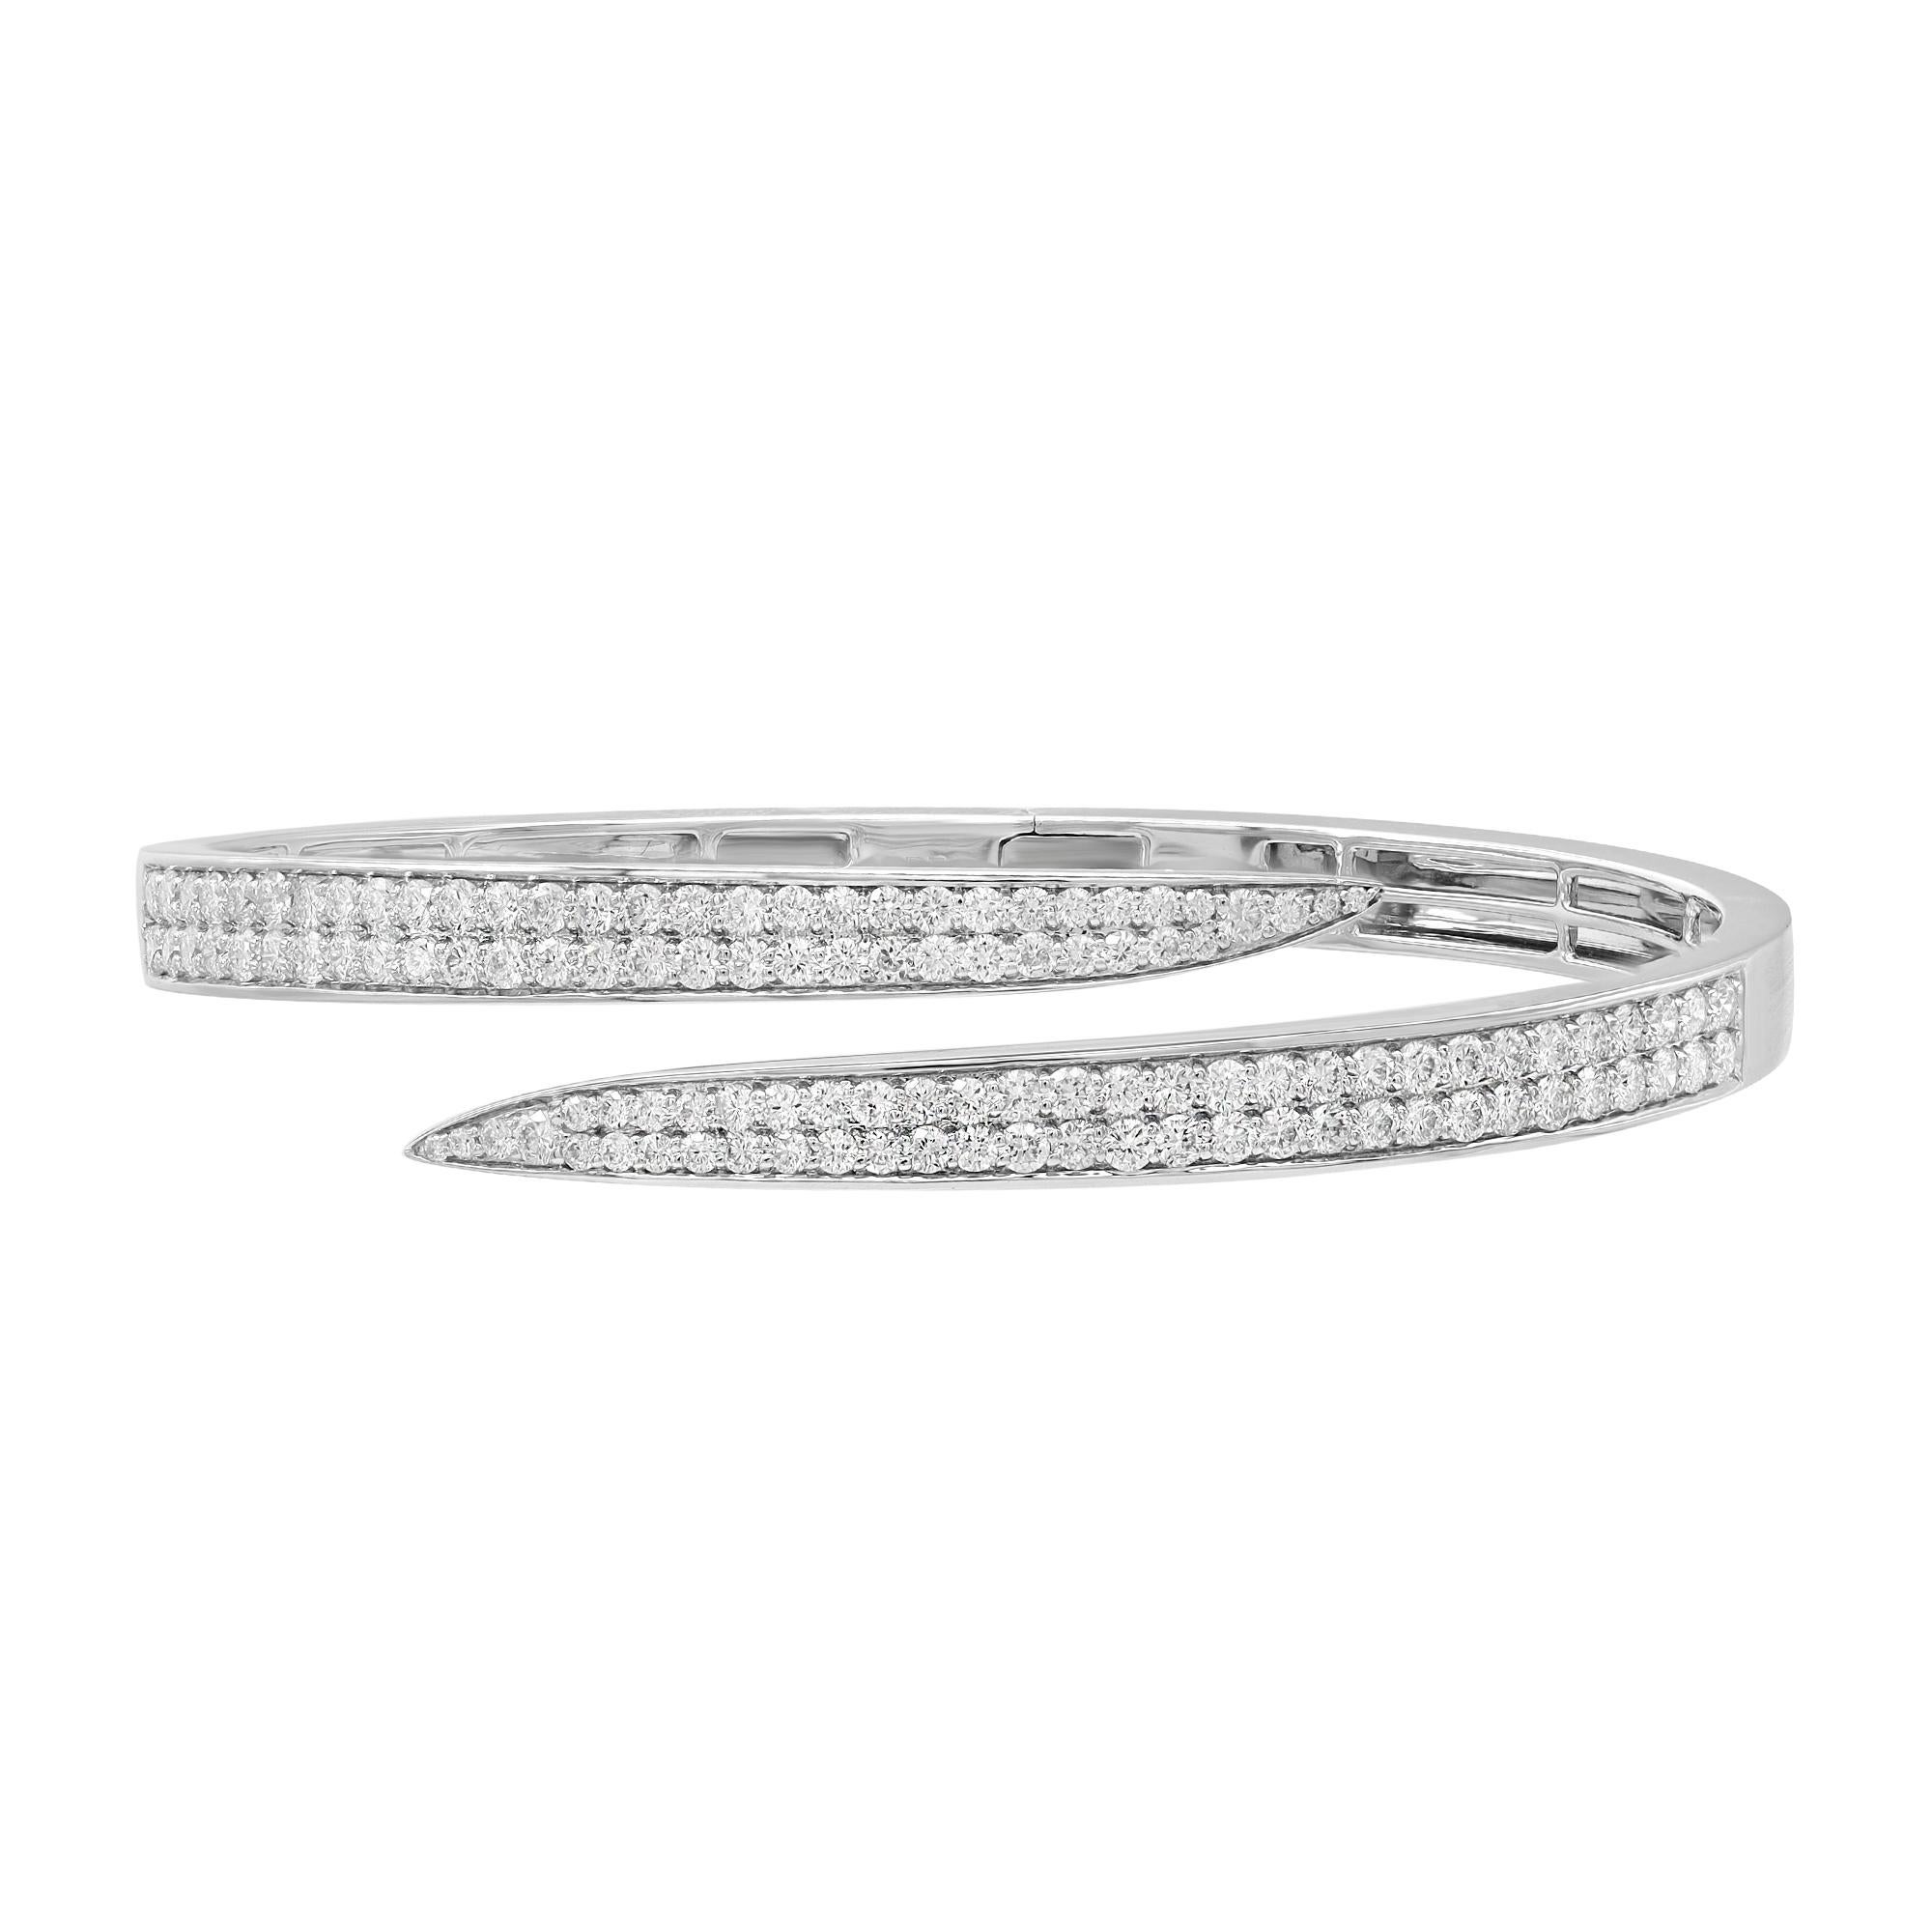 Rachel Koen Pave Set Round Cut Diamond Bangle Bracelet 18K White Gold 2.99cttw In New Condition For Sale In New York, NY